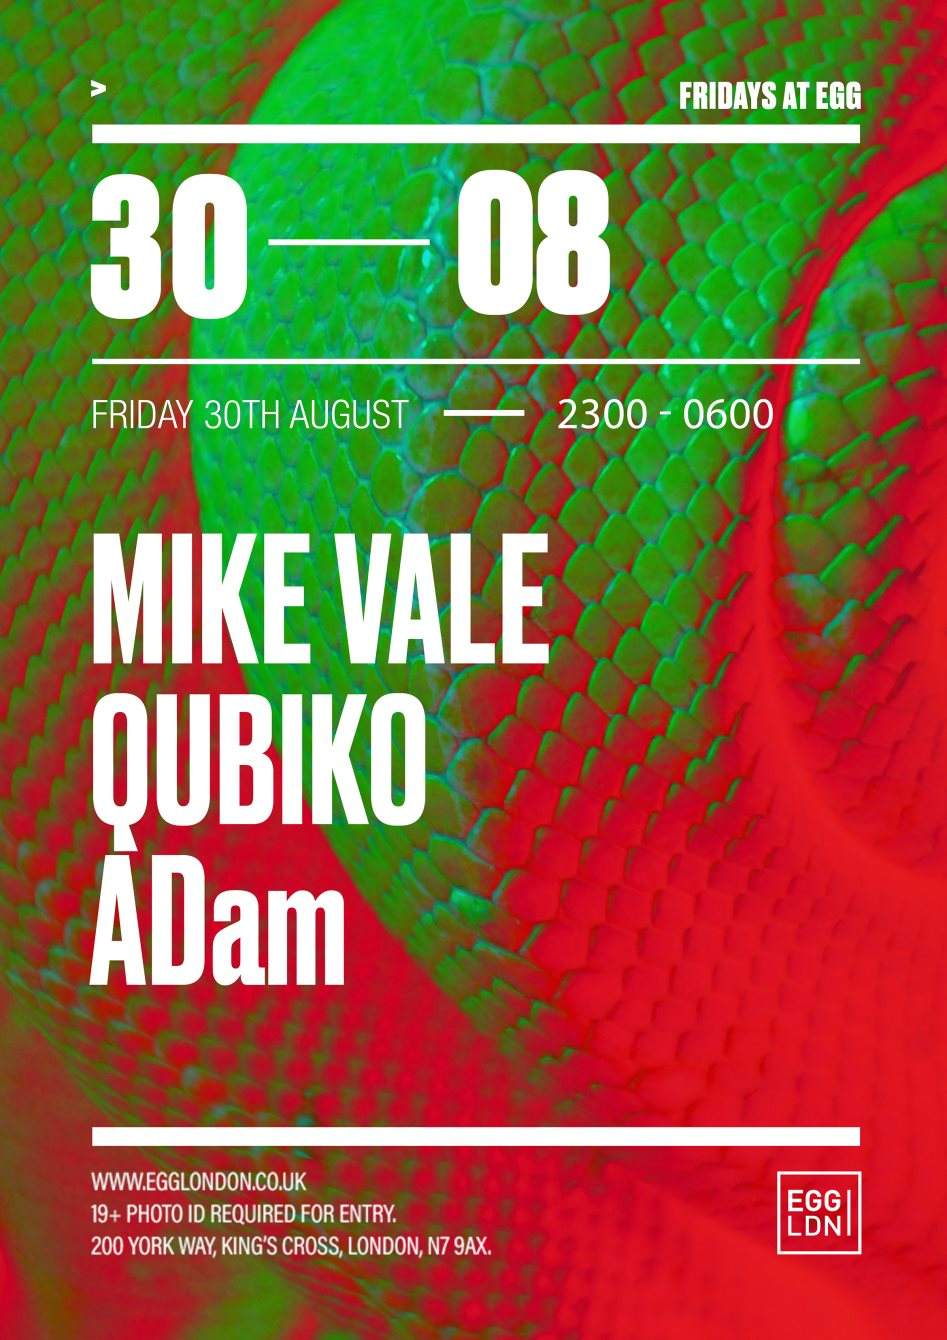 Fridays at EGG: Mike Vale, Qubiko, Adam and More - フライヤー表